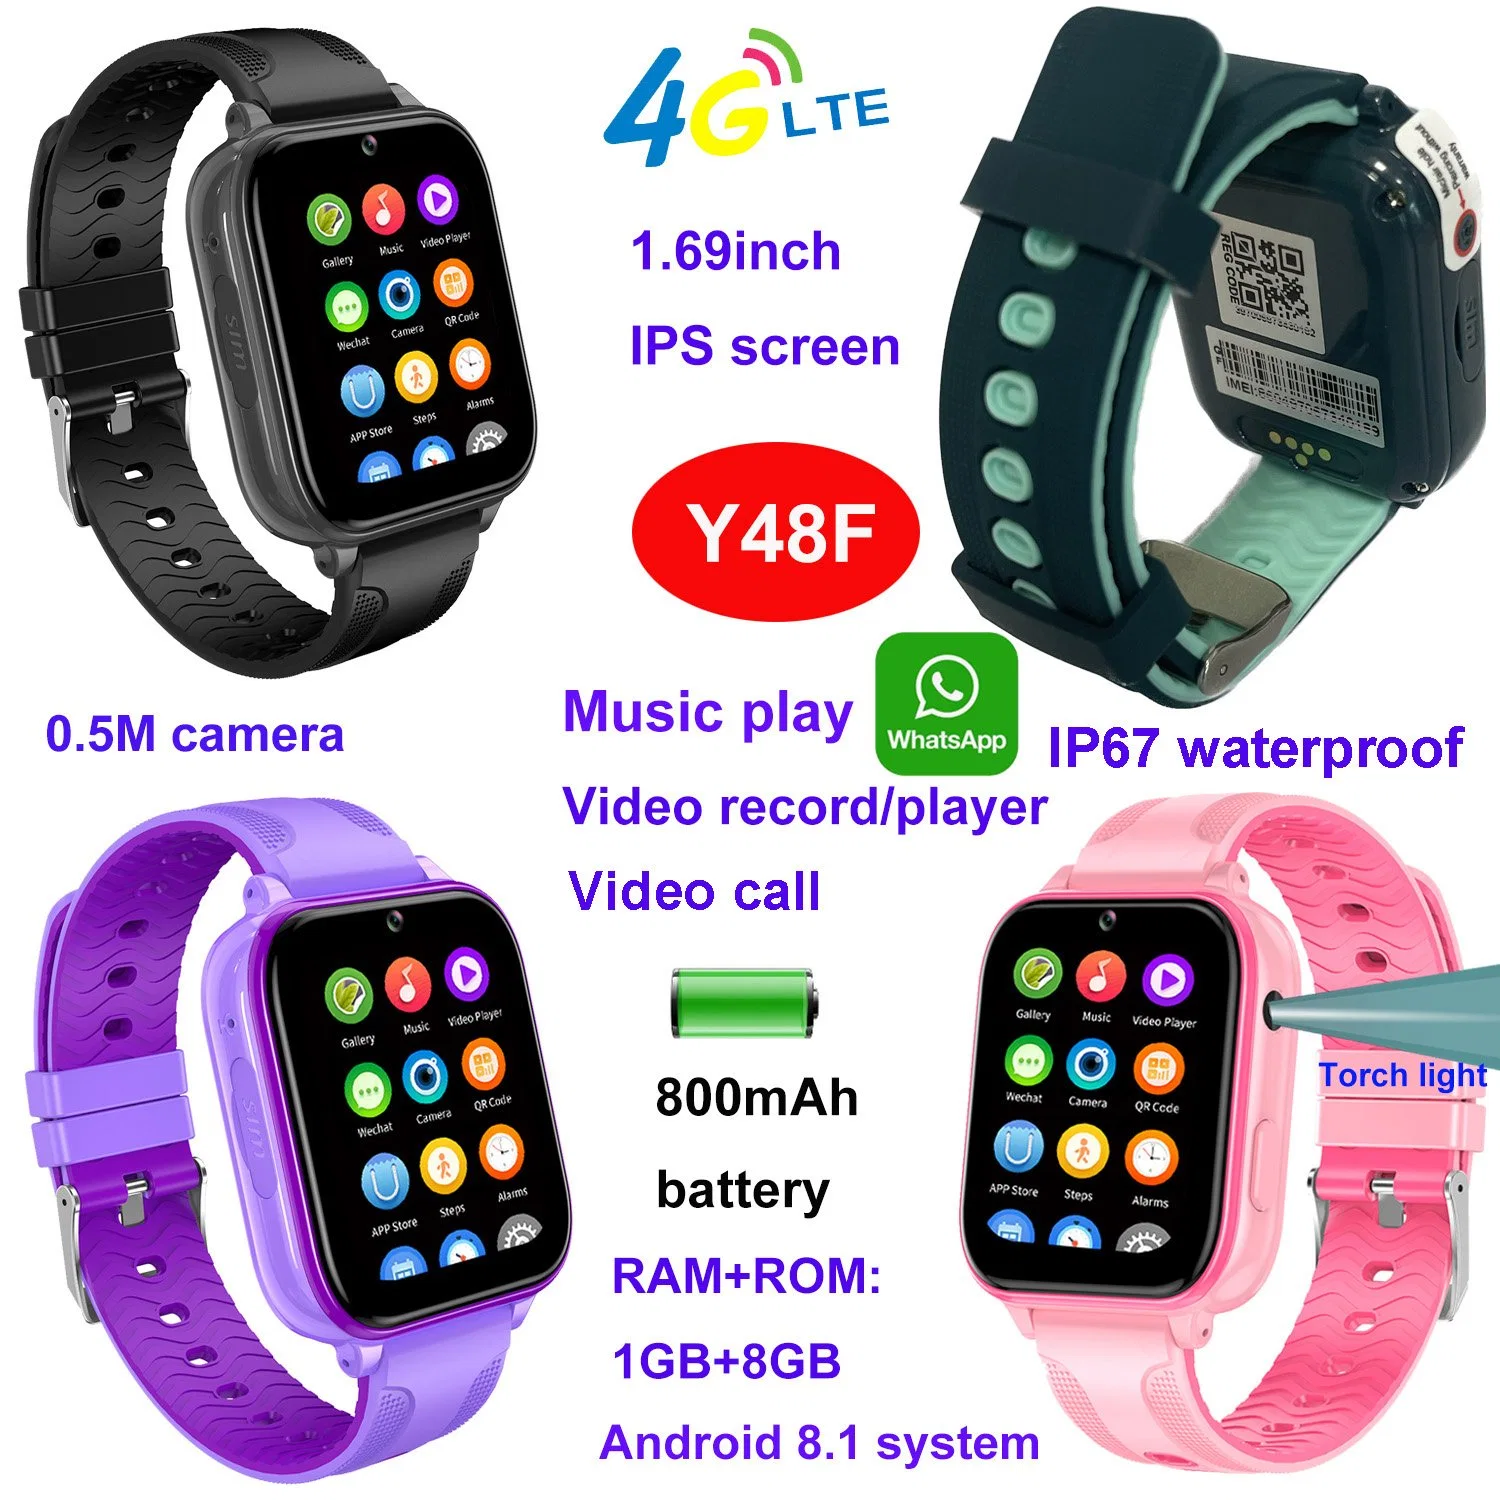 The latest 4G Android 8.1 system accurate SOS video call Child Kids Safety Smart Watch Phone GPS with long battery life Y48F